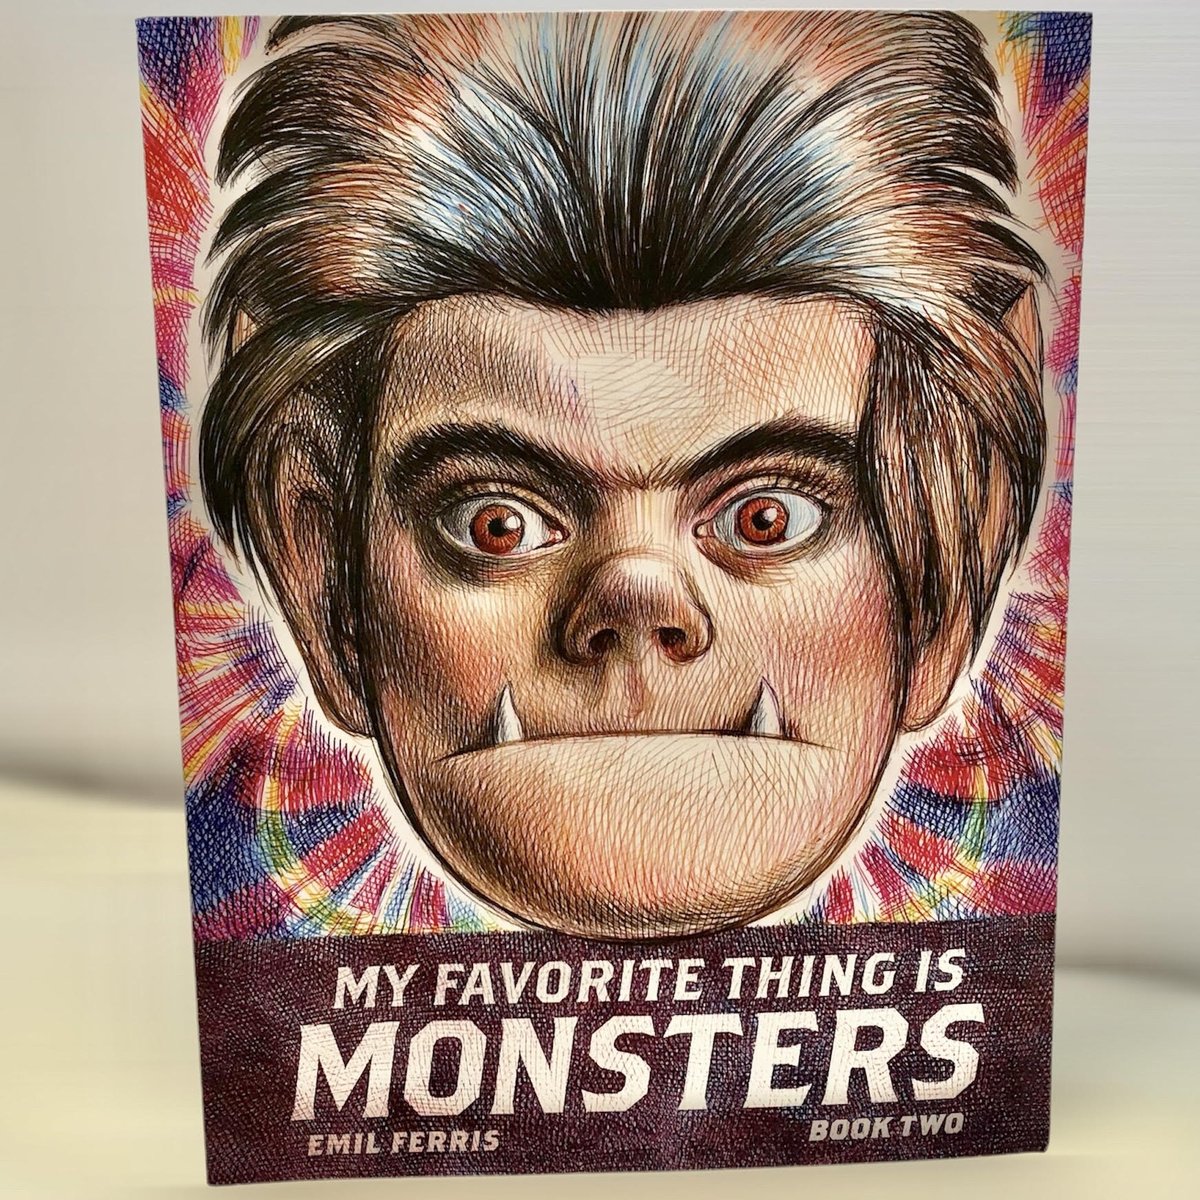 The wait is over, 'My Favorite Thing is Monsters 2' by @Emilferrisdraws is now here. Plenty more fantastic drawings to absorb in this one.